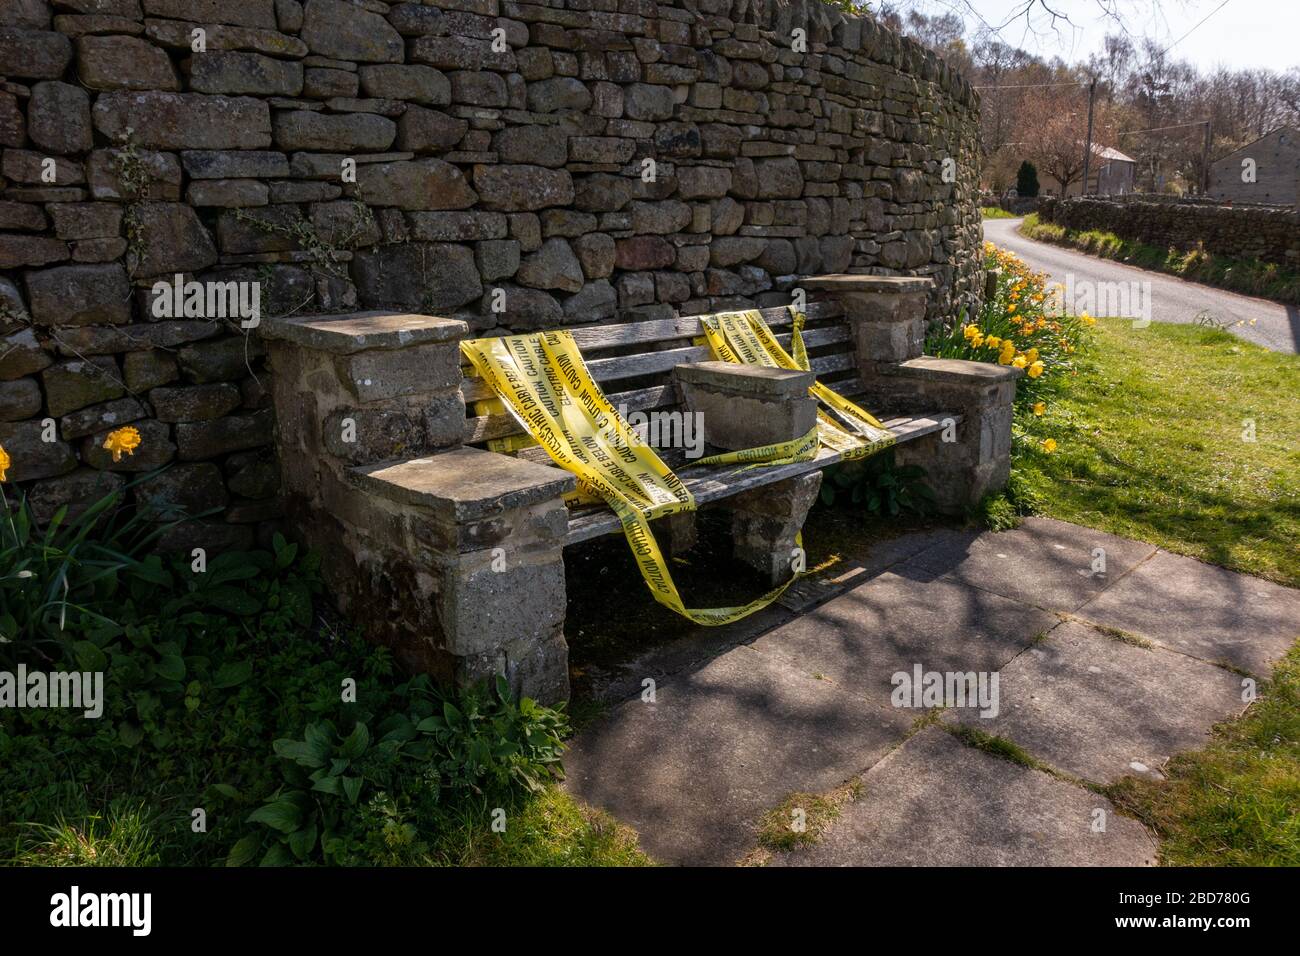 Taped up bench (probably done by locals) preventing people from socialising on it during the Coronavirus crisis and social distancing. Beamsley, North Yorkshire, England, UK Stock Photo